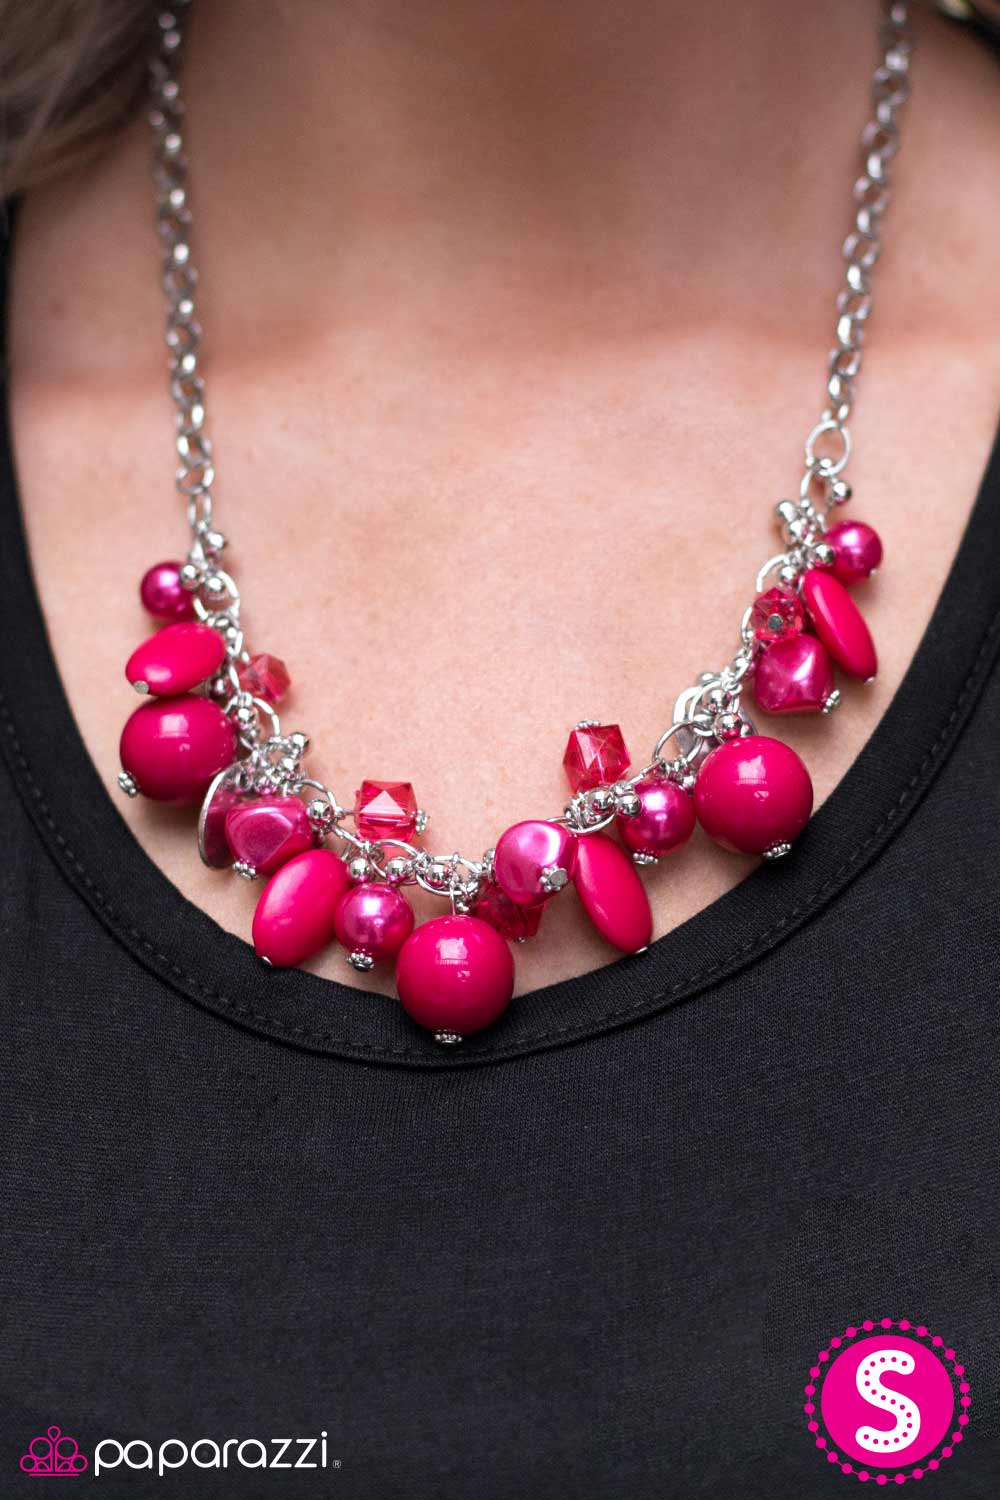 Hollywood Starlet - pink - Paparazzi necklace